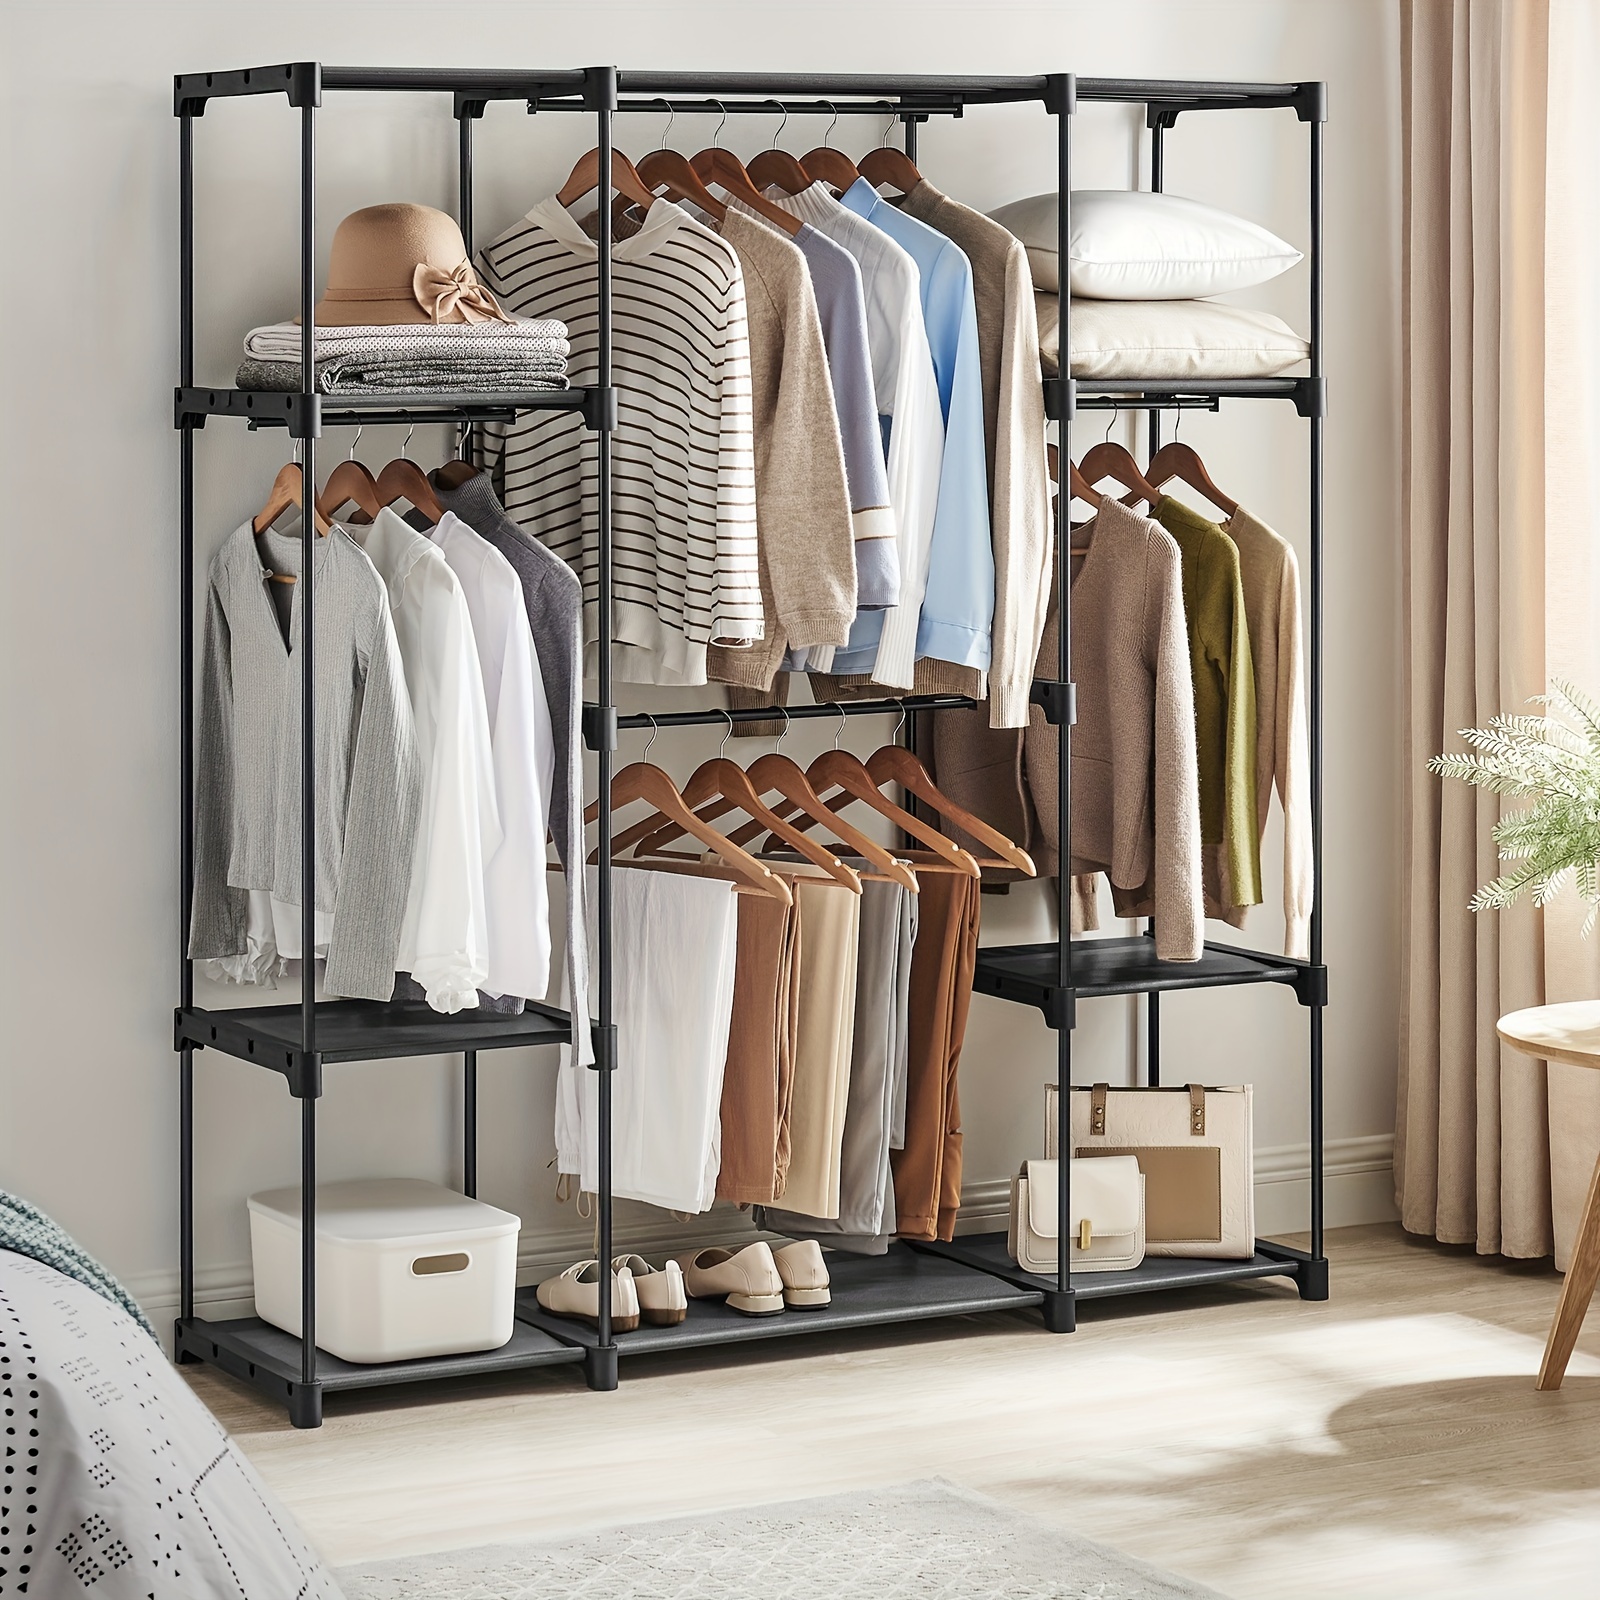 

Songmics Portable Closet, Freestanding Closet Organizer, Clothes Rack With Shelves, Hanging Rods, Storage Organizer, For Cloakroom, Bedroom, 59.5 X 16.9 X 65.4 Inches, Black